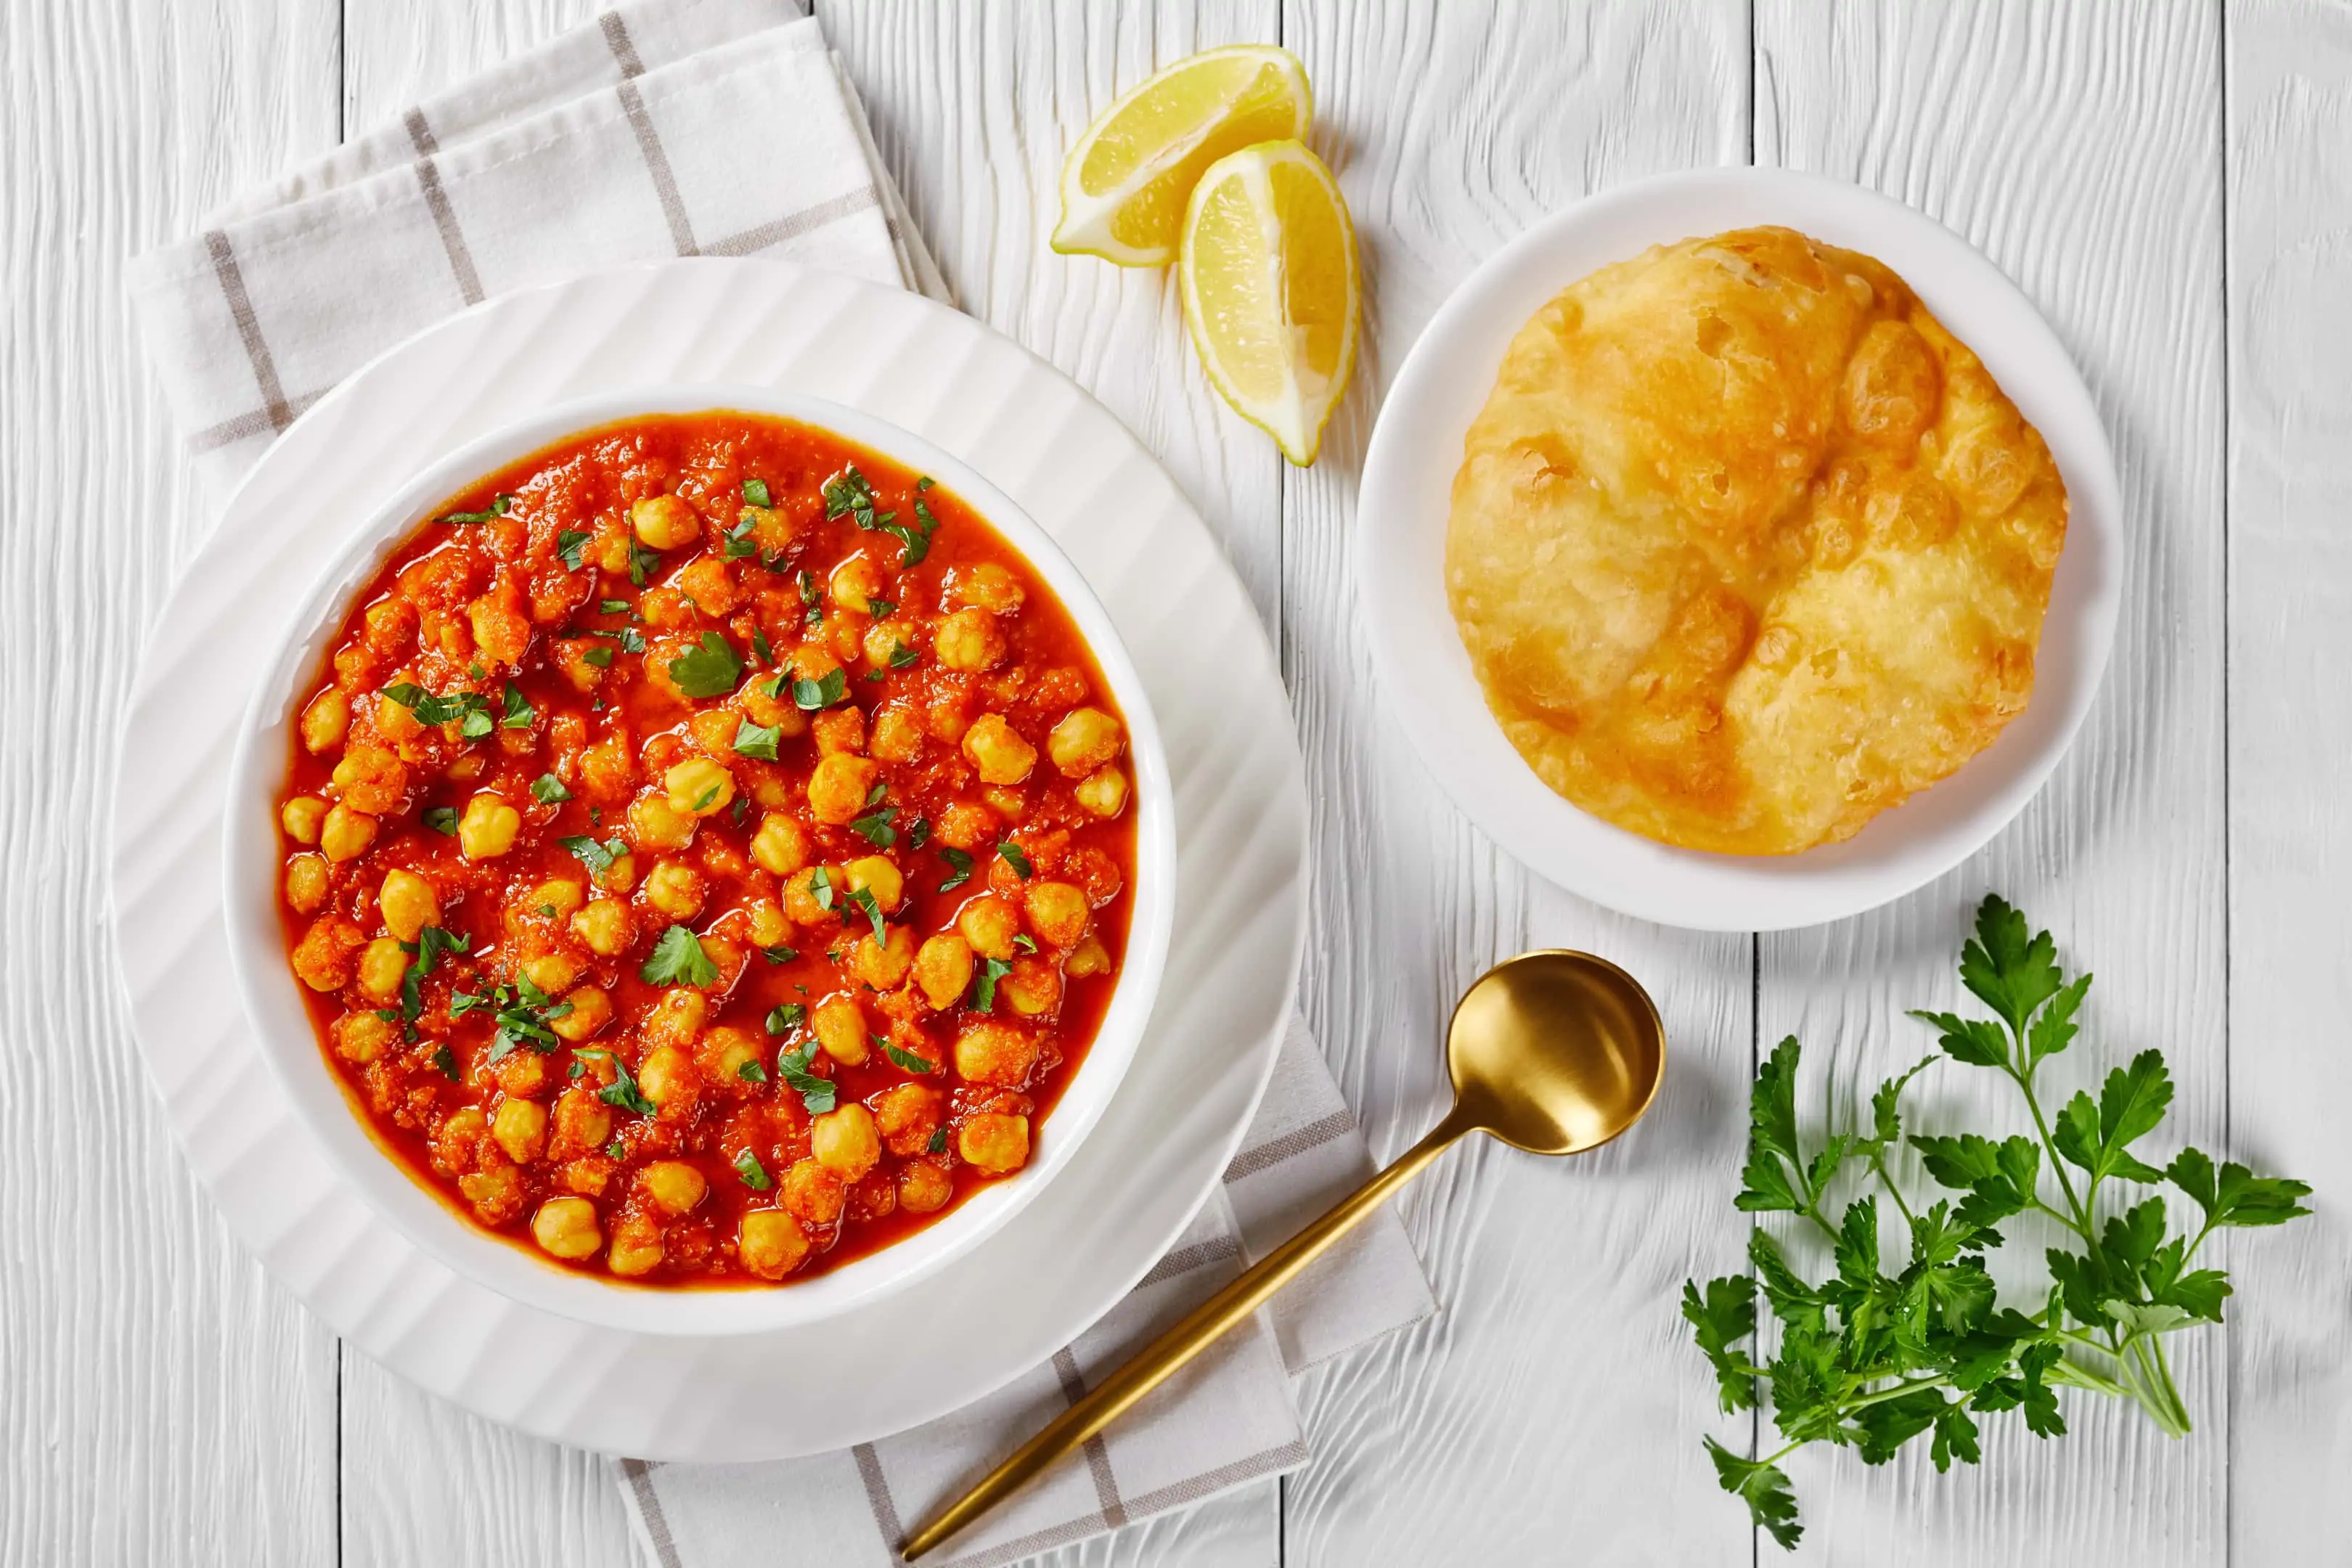 Chana masala chickpea curry with spices and tomato sauce served with indian fried bread bhatura